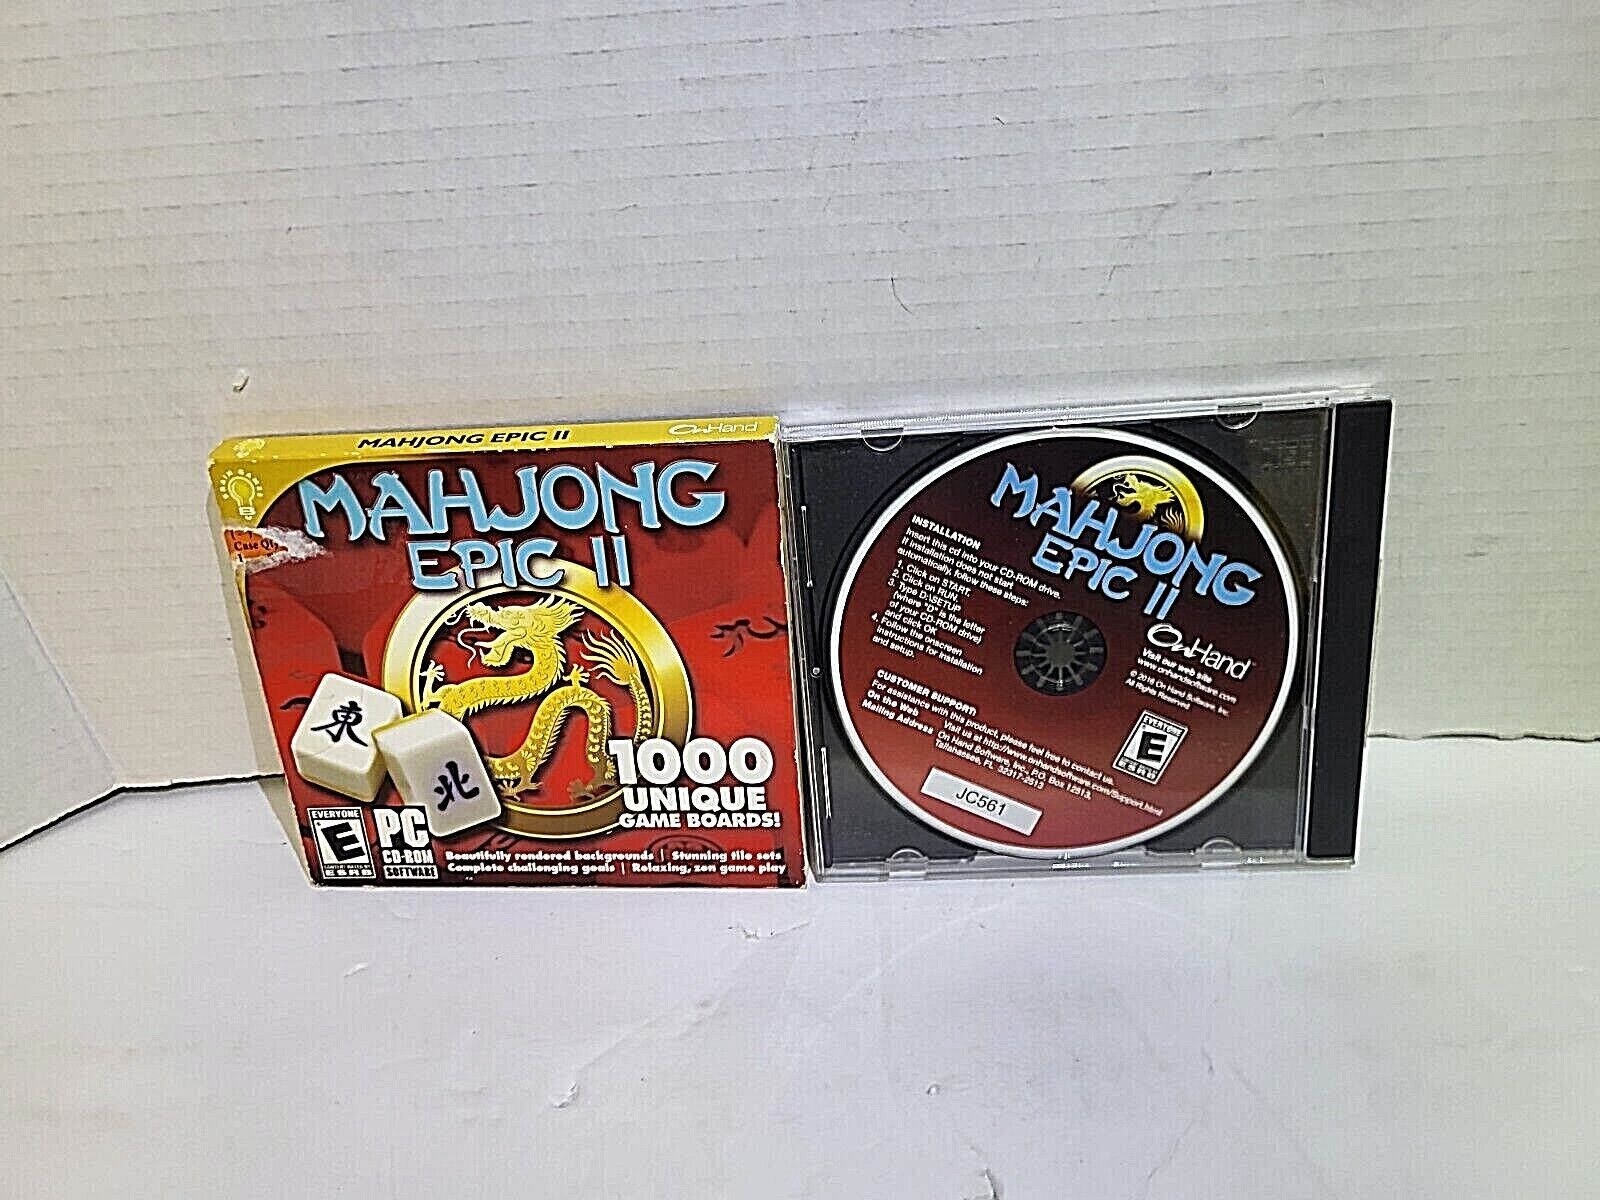 Mahjon Epic II 1000 Unique Game Boards PC CD Rom Game (Rated E) 